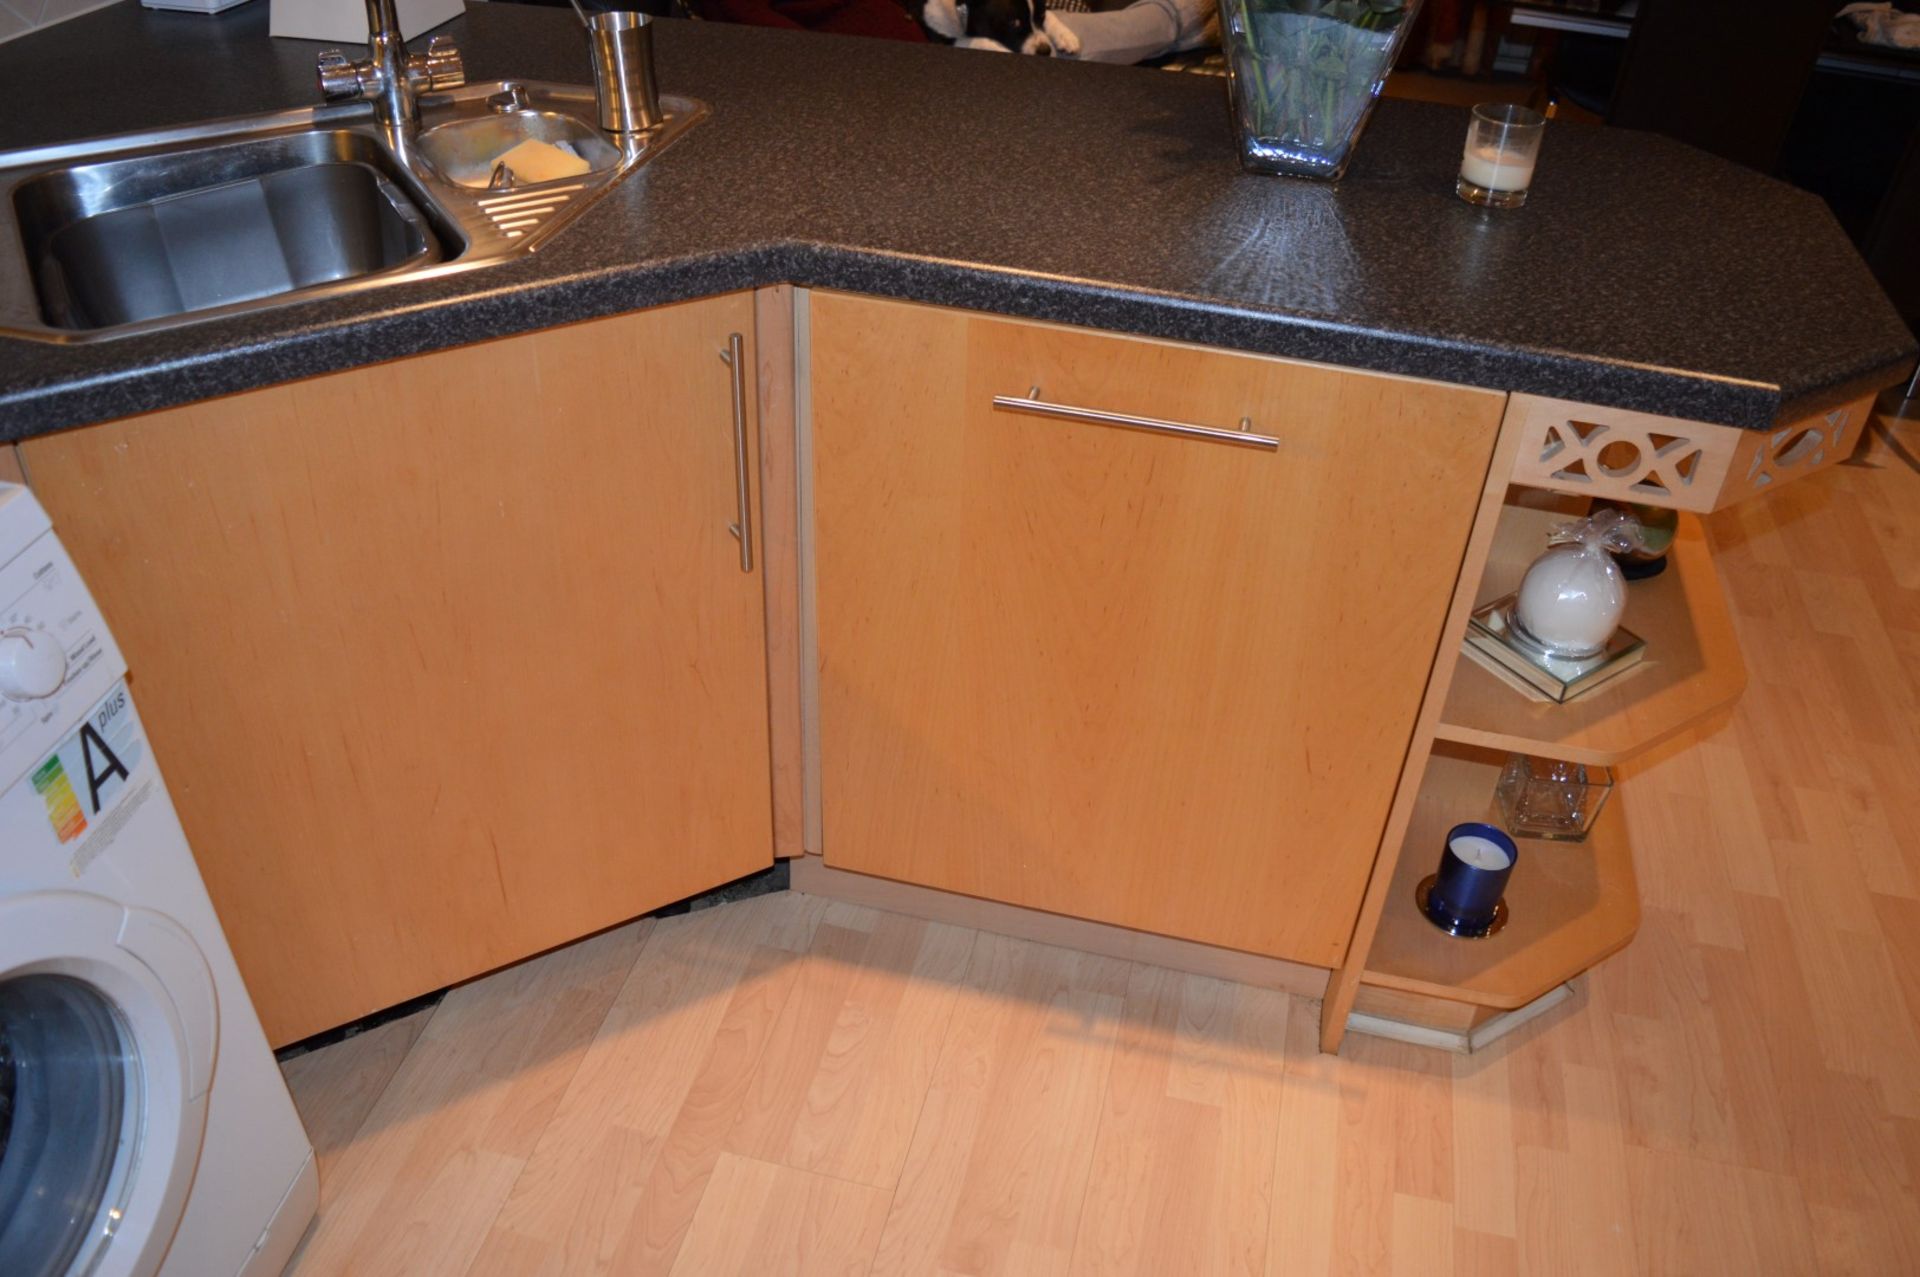 1 x Manor Cabinet Company Fitted Kitchen - Contemporary Beech Finish With Black Worktops and - Image 25 of 47